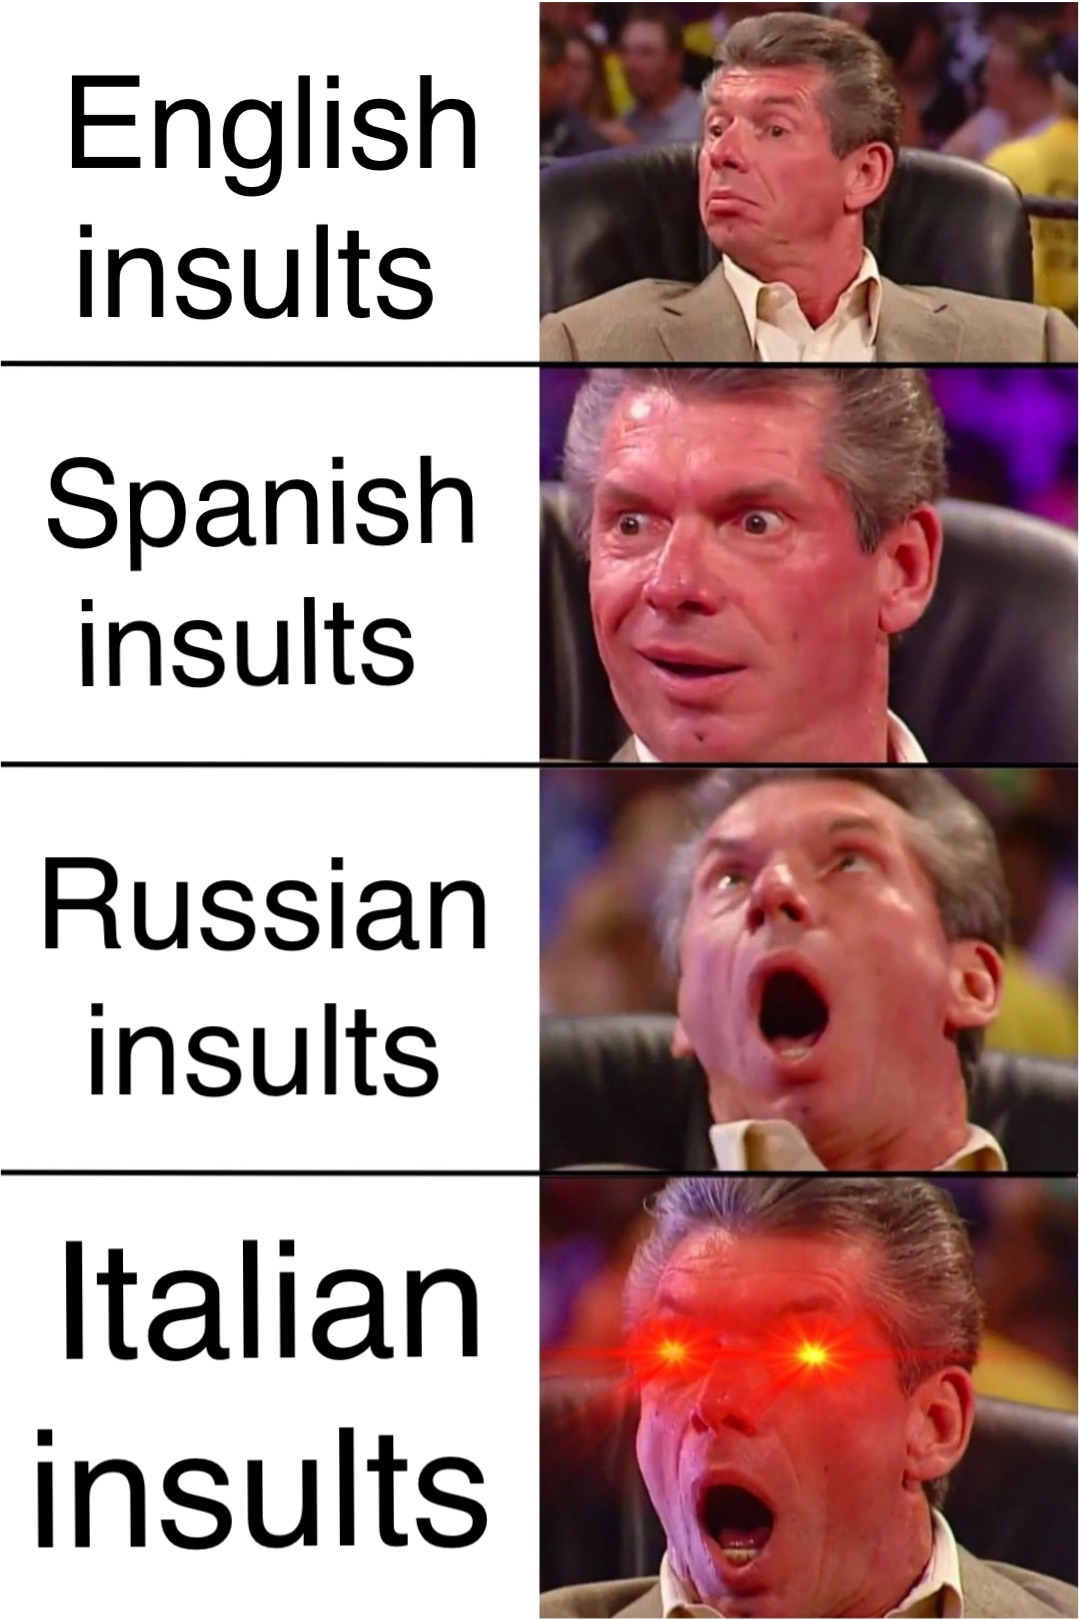 English insults Spanish insults Russian insults Italian insults